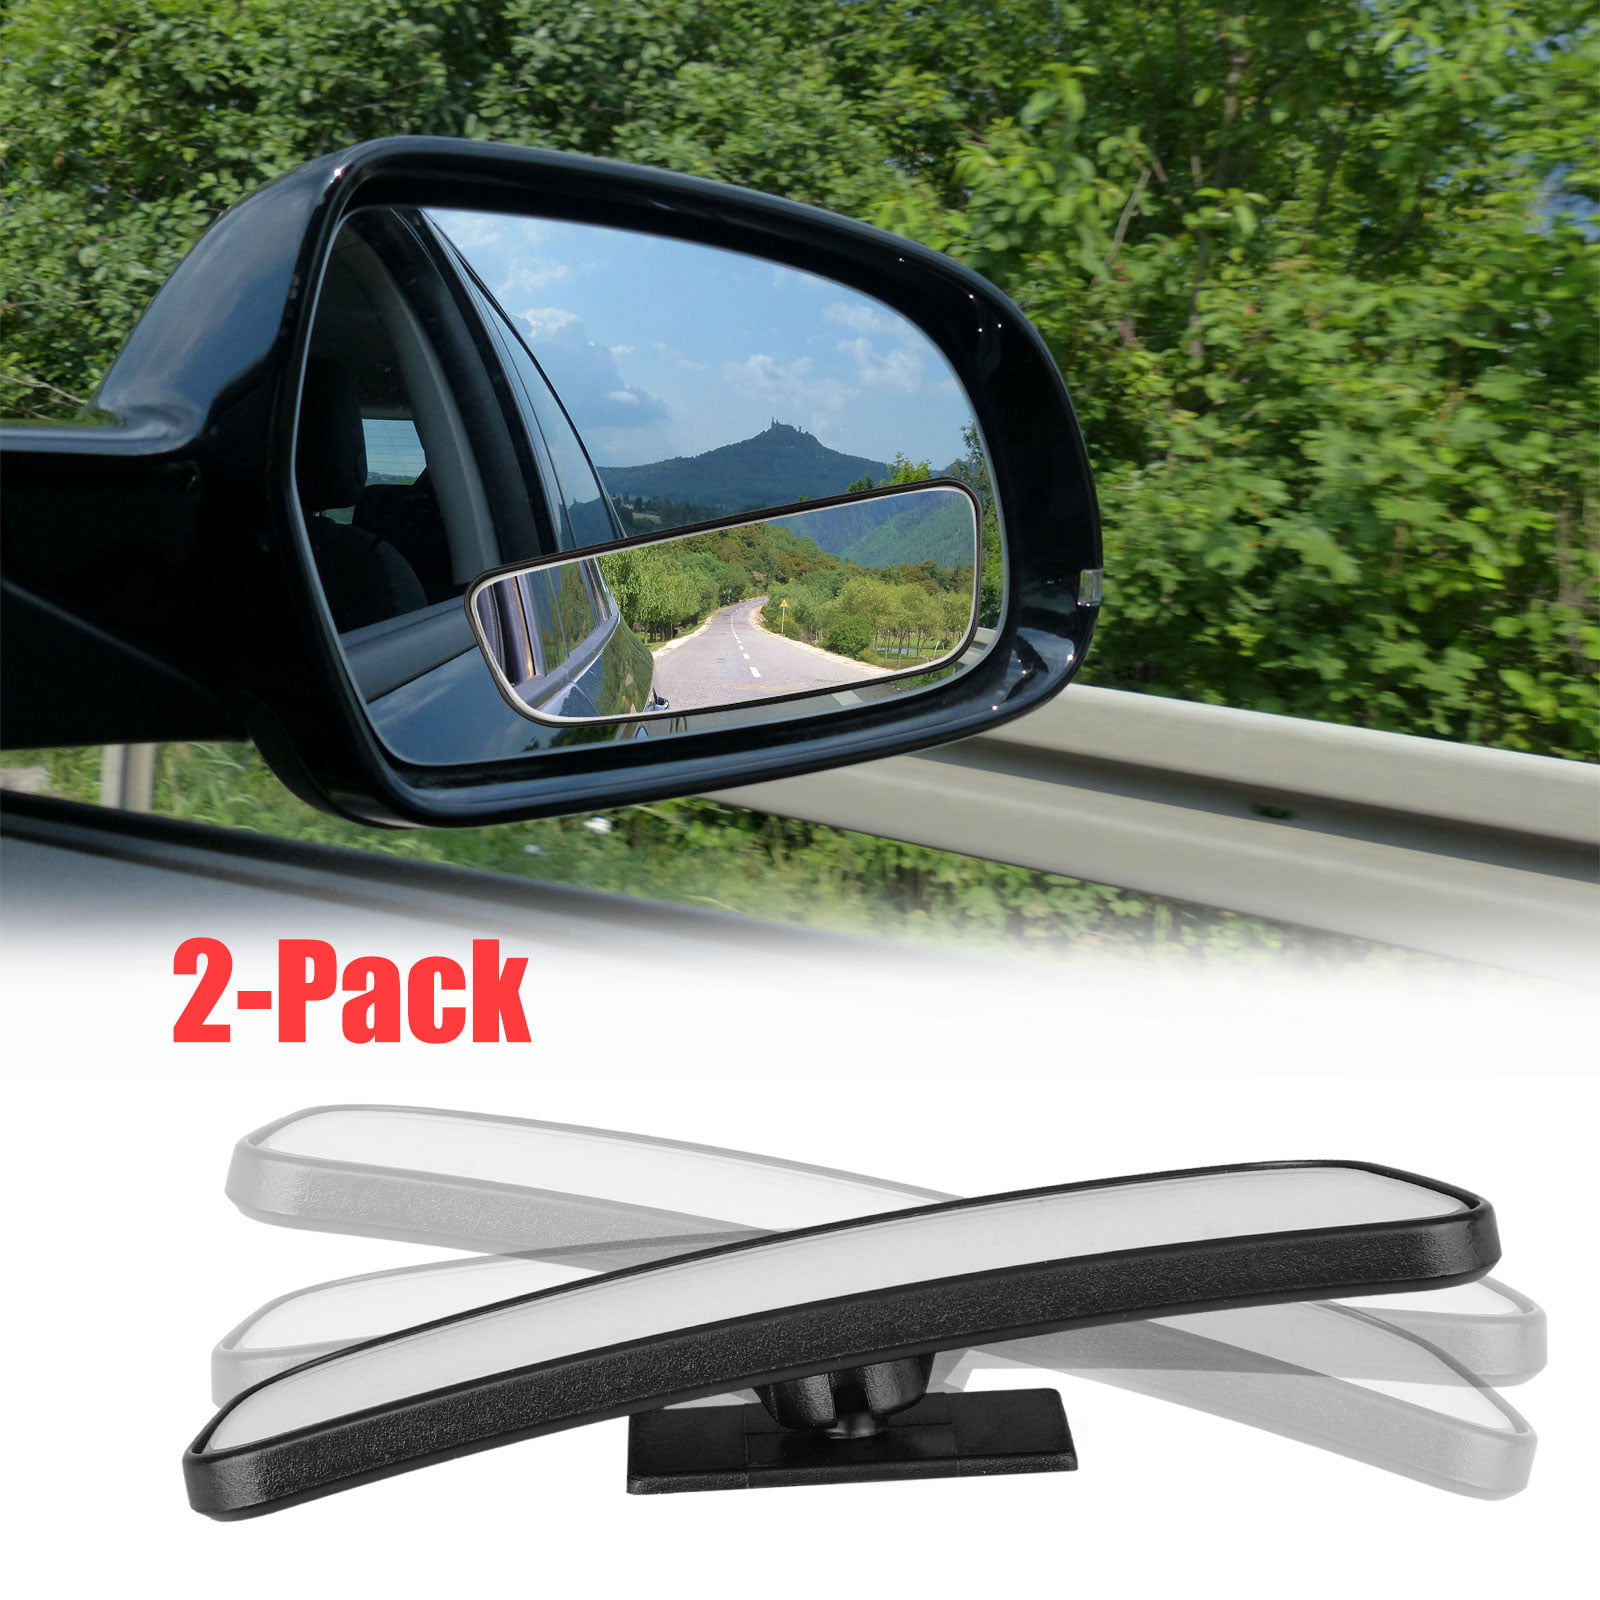 EKLEVA Universal 2Pcs Wide Angle Convex Rear Side View Blind Spot Mirror for Car